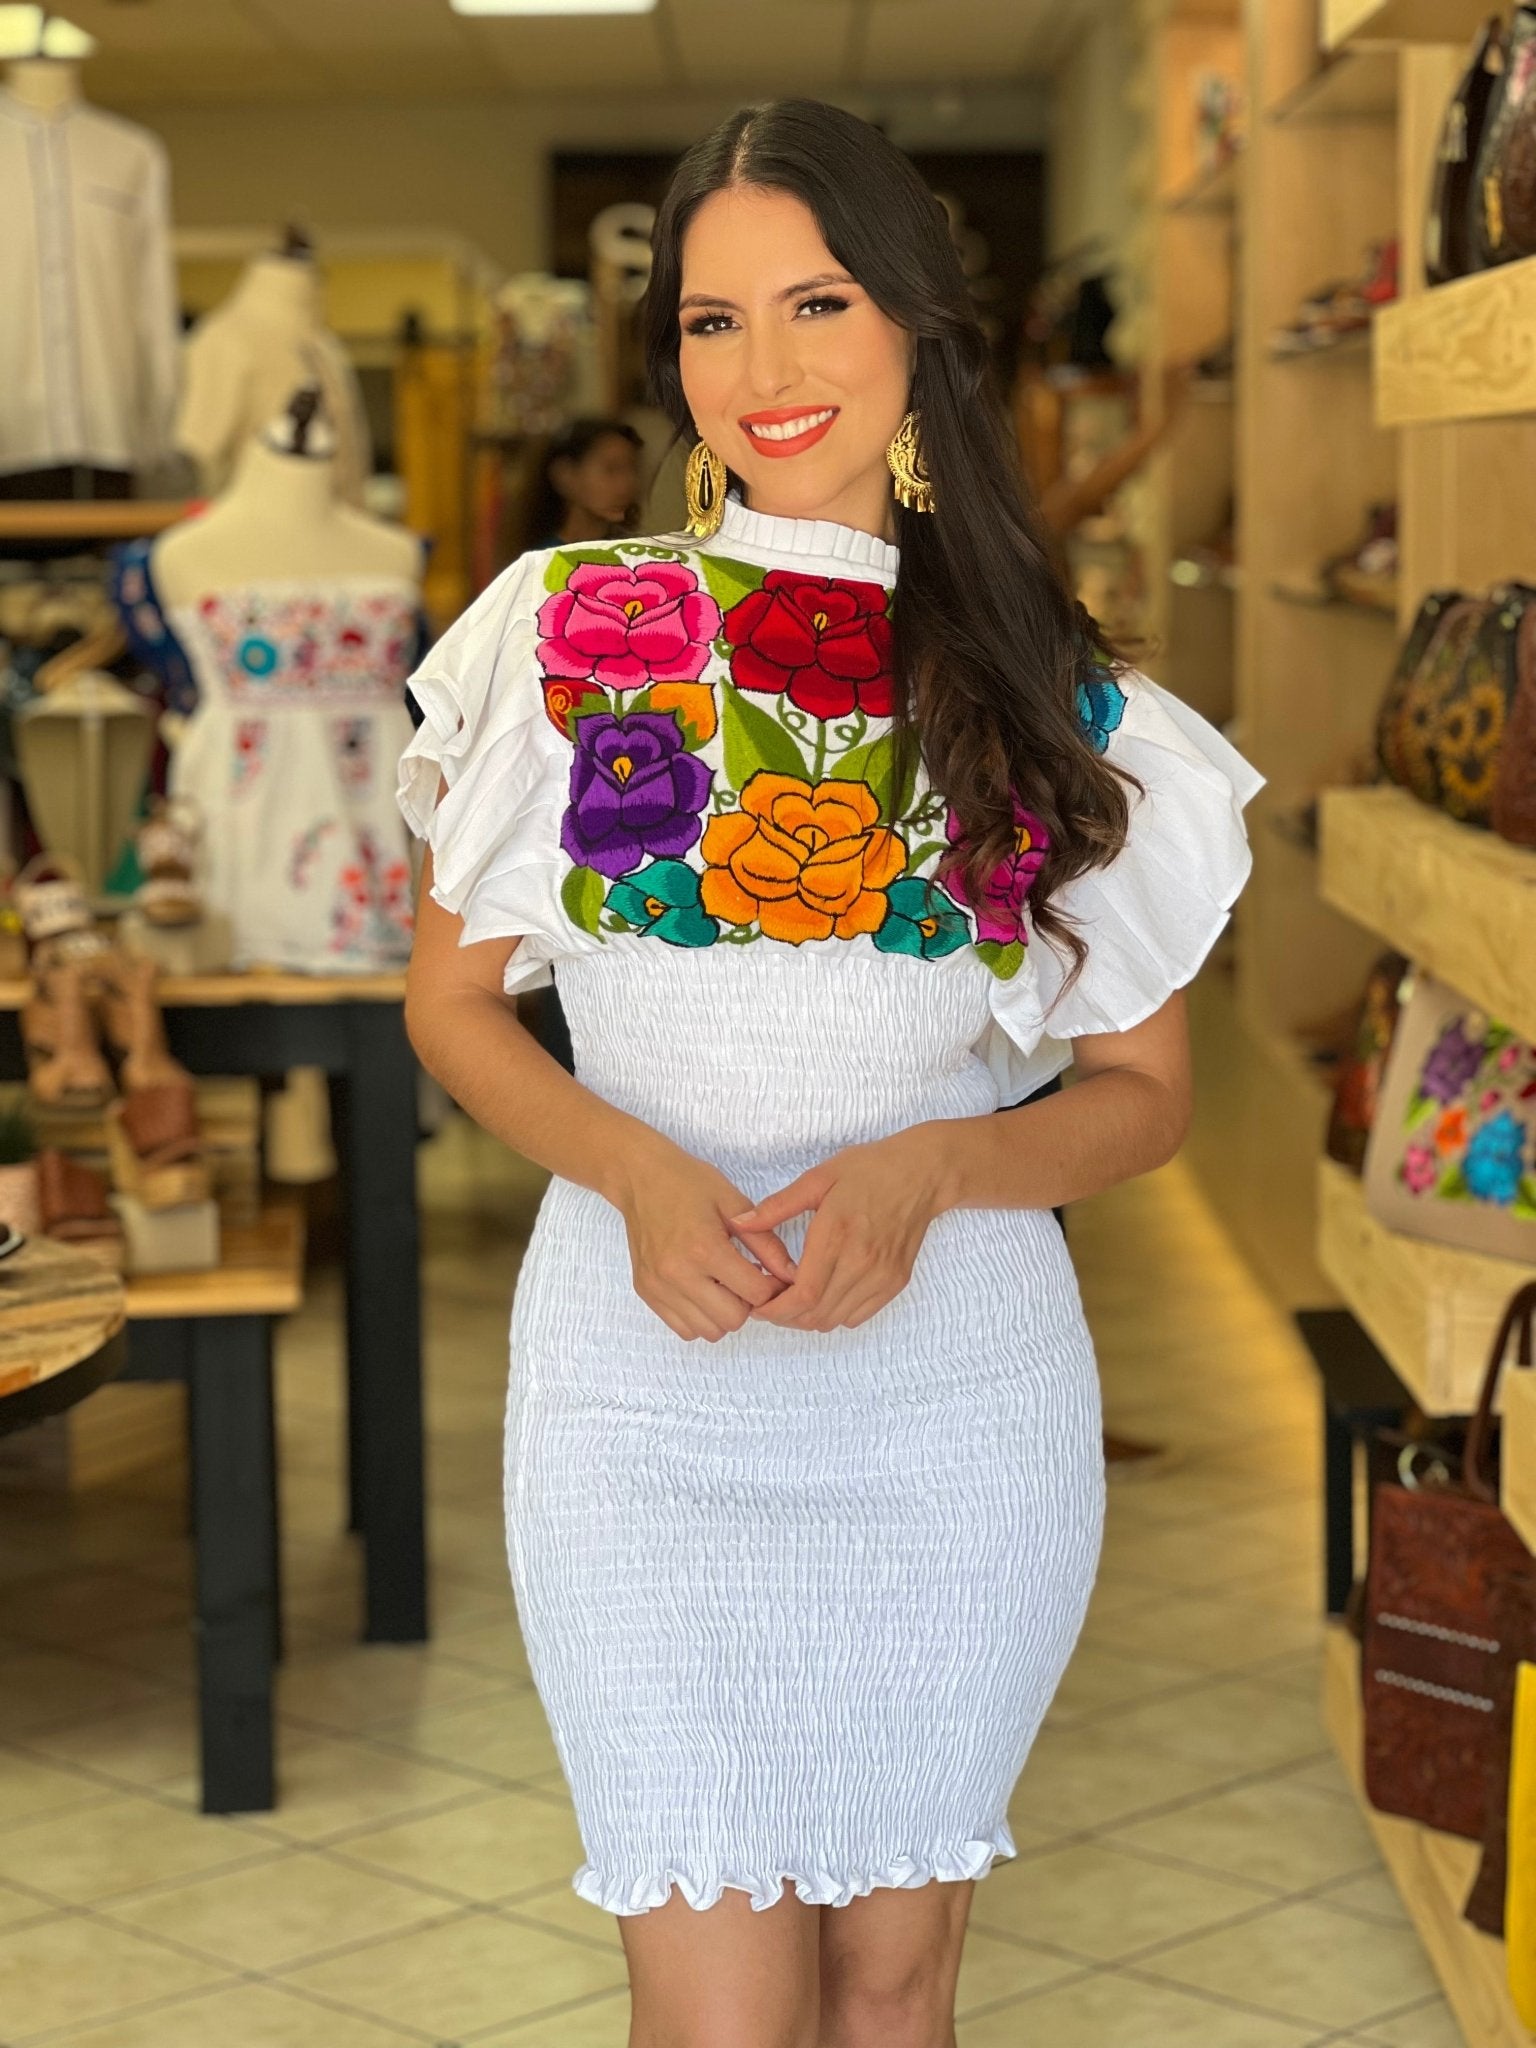 Mexican Embroidered Bodycon Dress. Ursula Dress - Solei Store